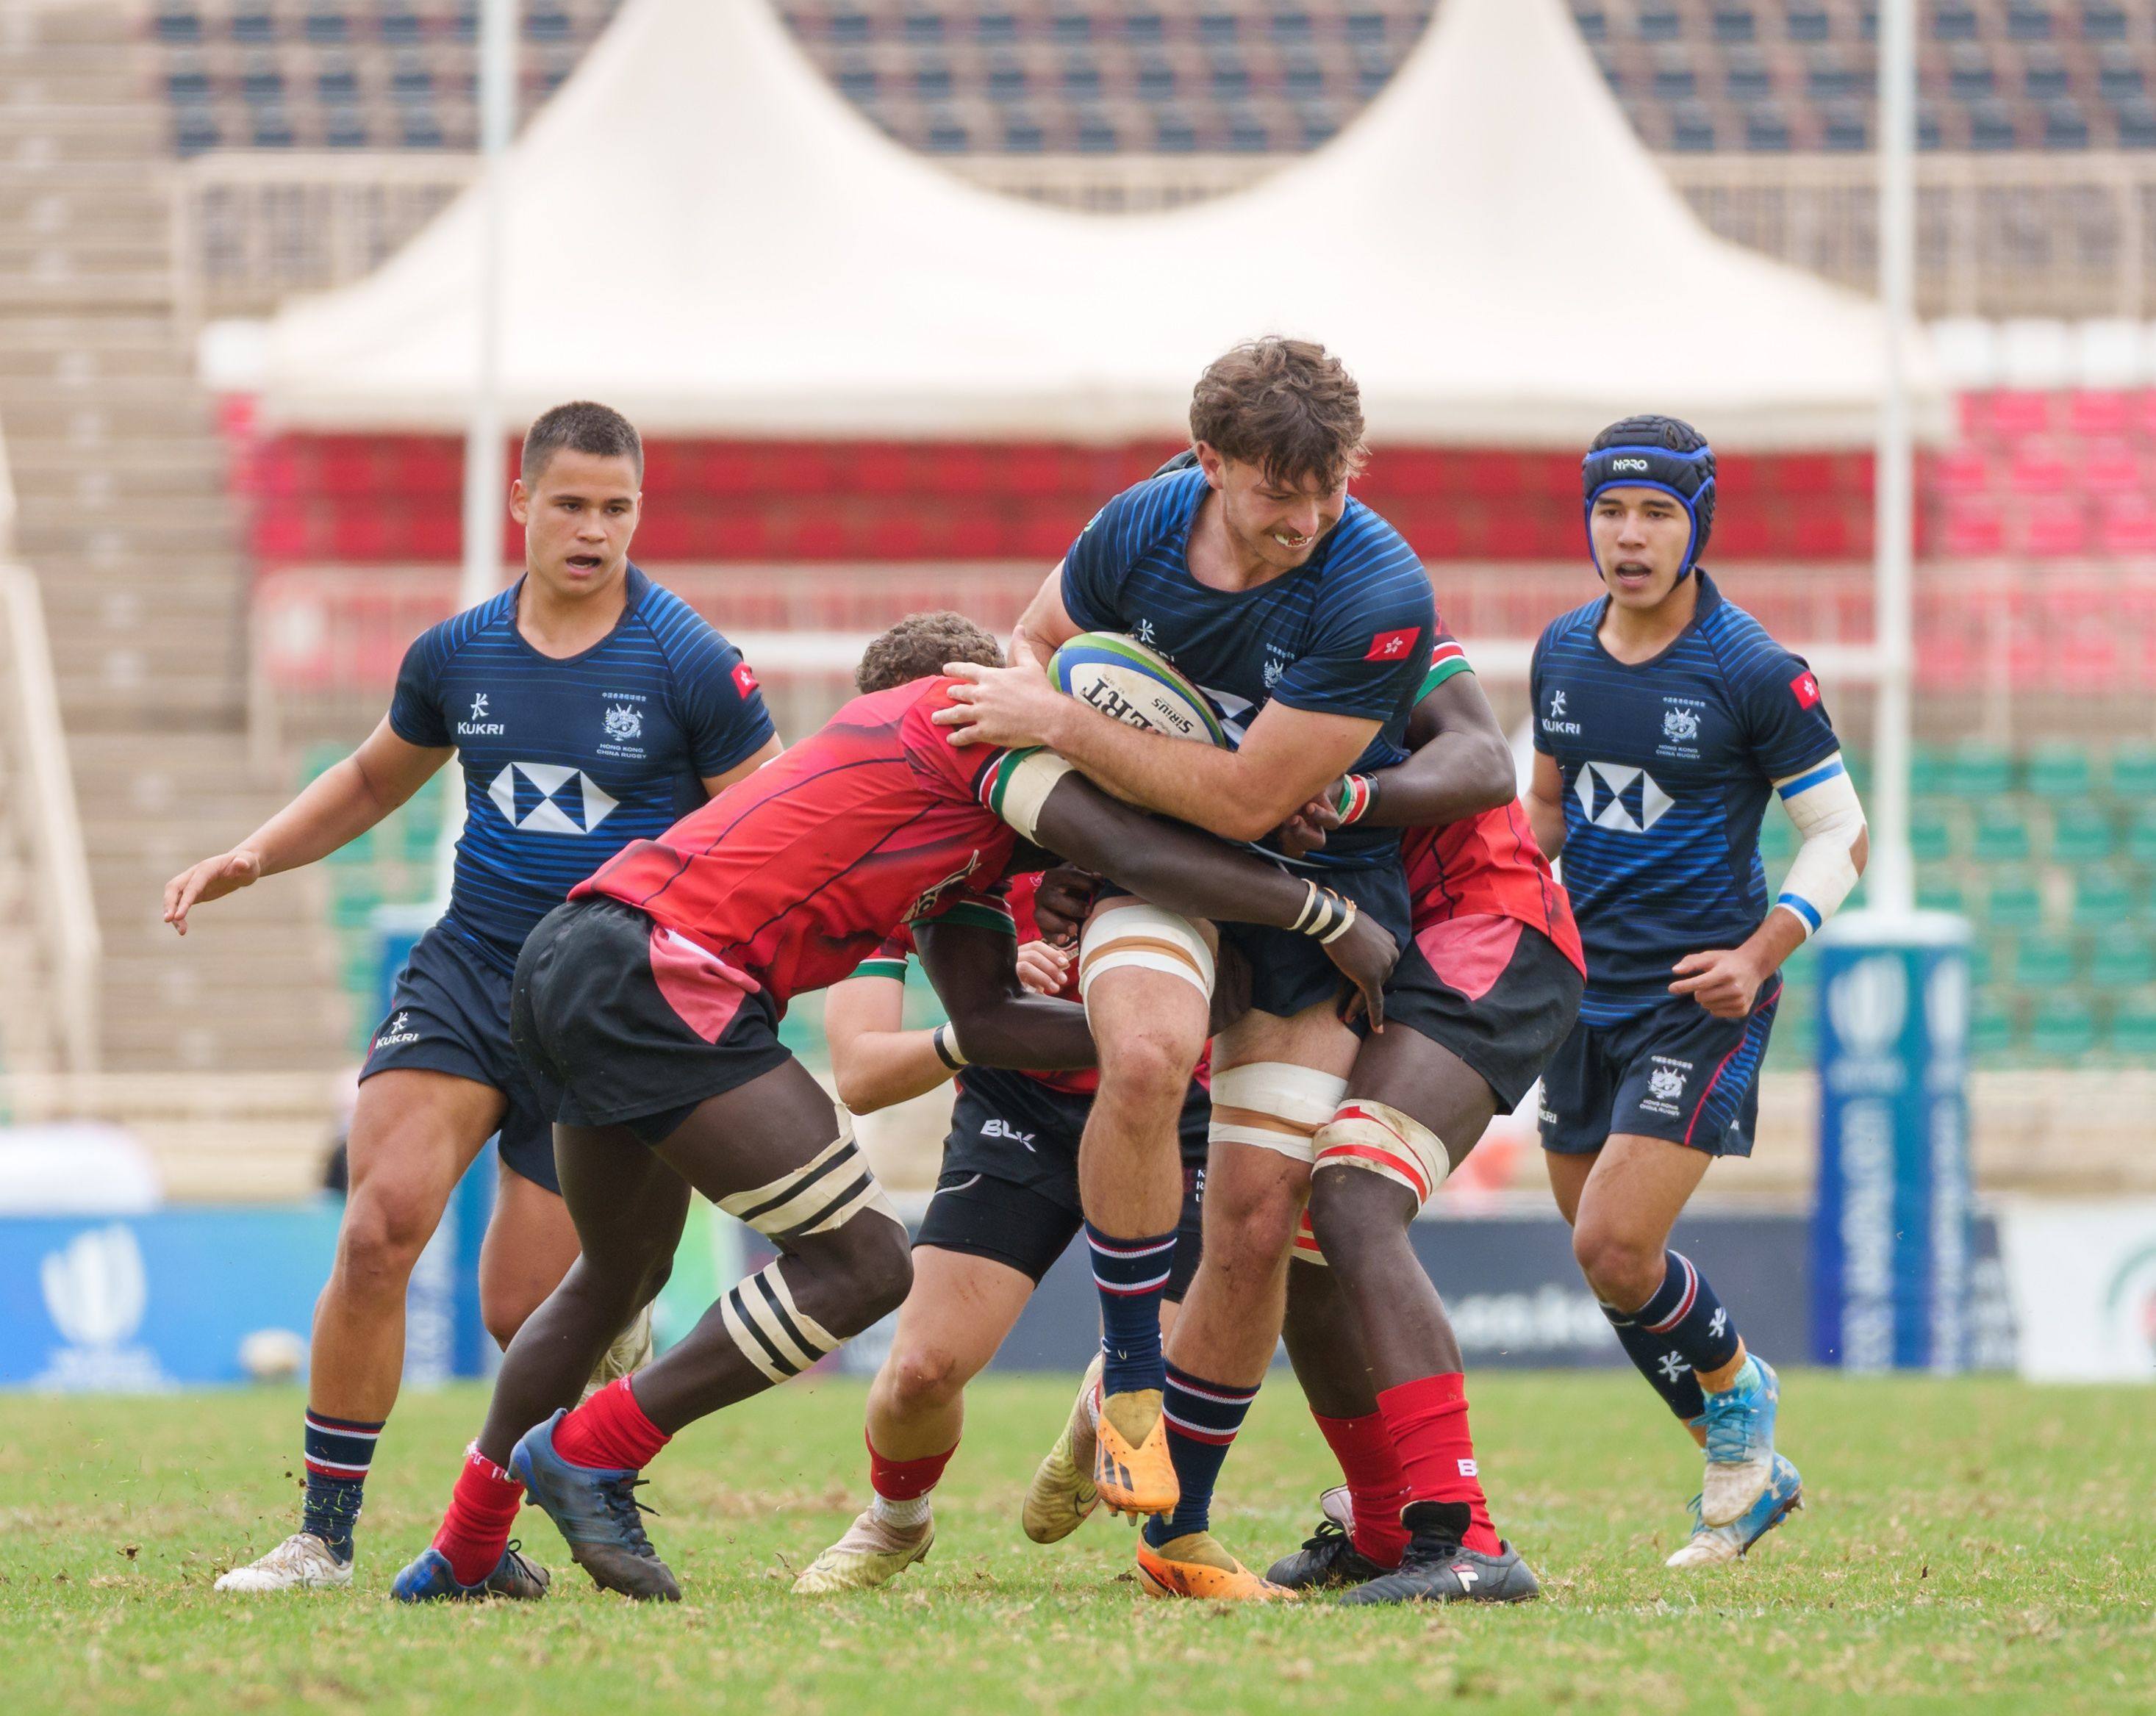 Hong Kong captain Tyler McNutt tries to break through the Kenya defence during his side’s World Rugby U20 Trophy game in Nairobi. Photo: World Rugby